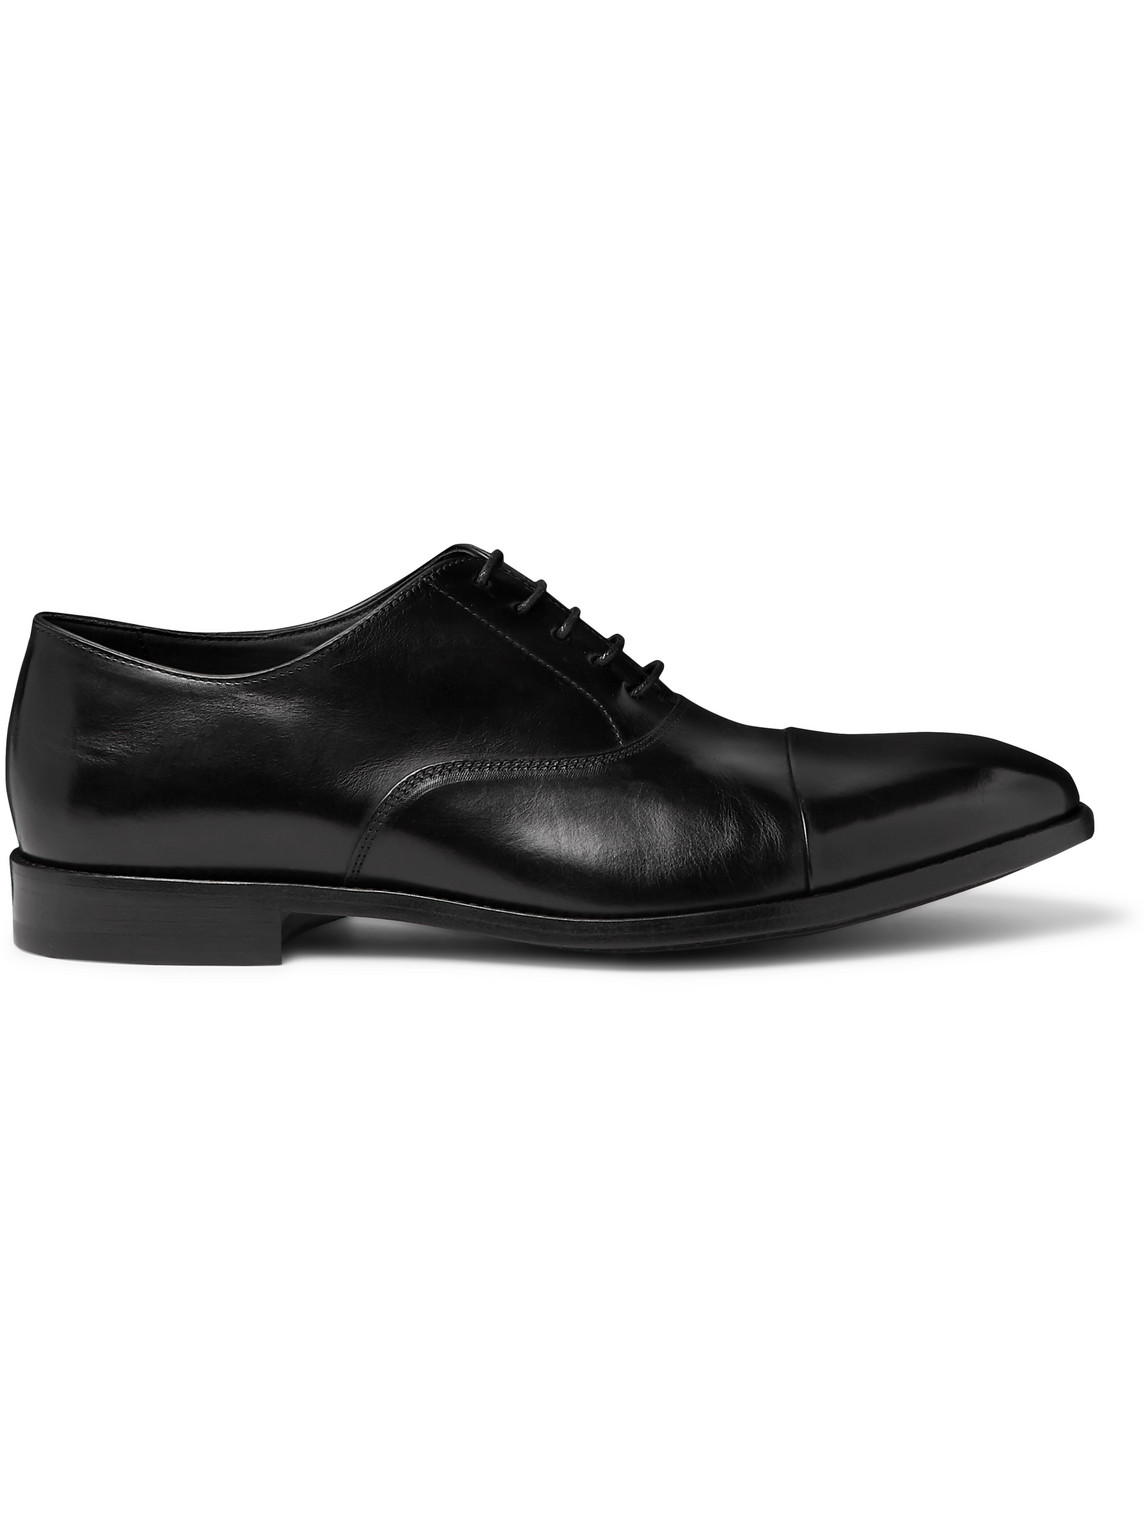 PAUL SMITH BRENT LEATHER OXFORD SHOES